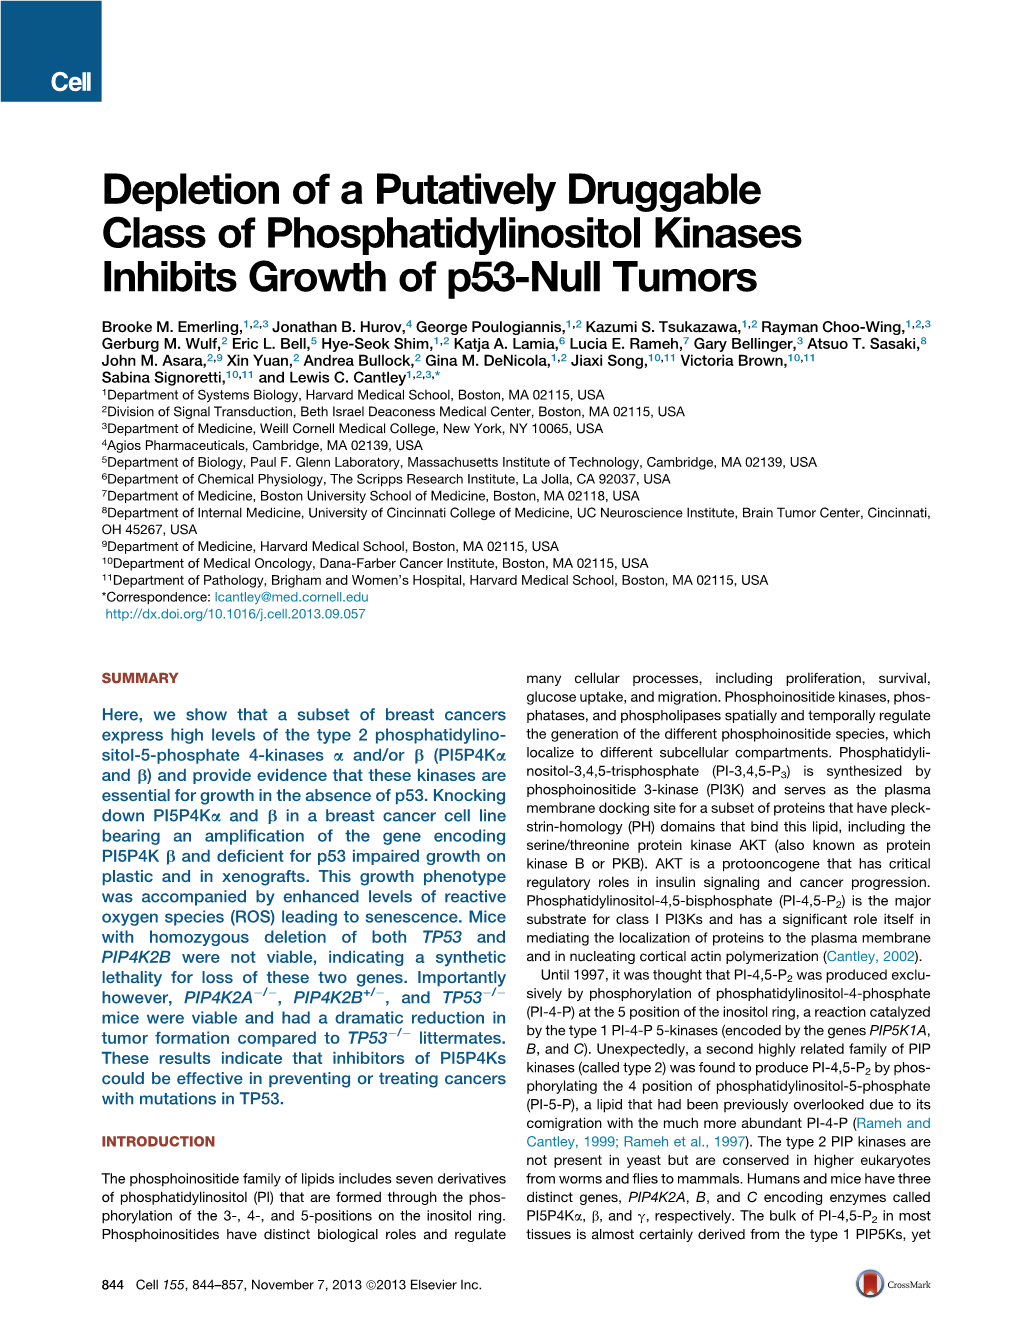 Depletion of a Putatively Druggable Class of Phosphatidylinositol Kinases Inhibits Growth of P53-Null Tumors